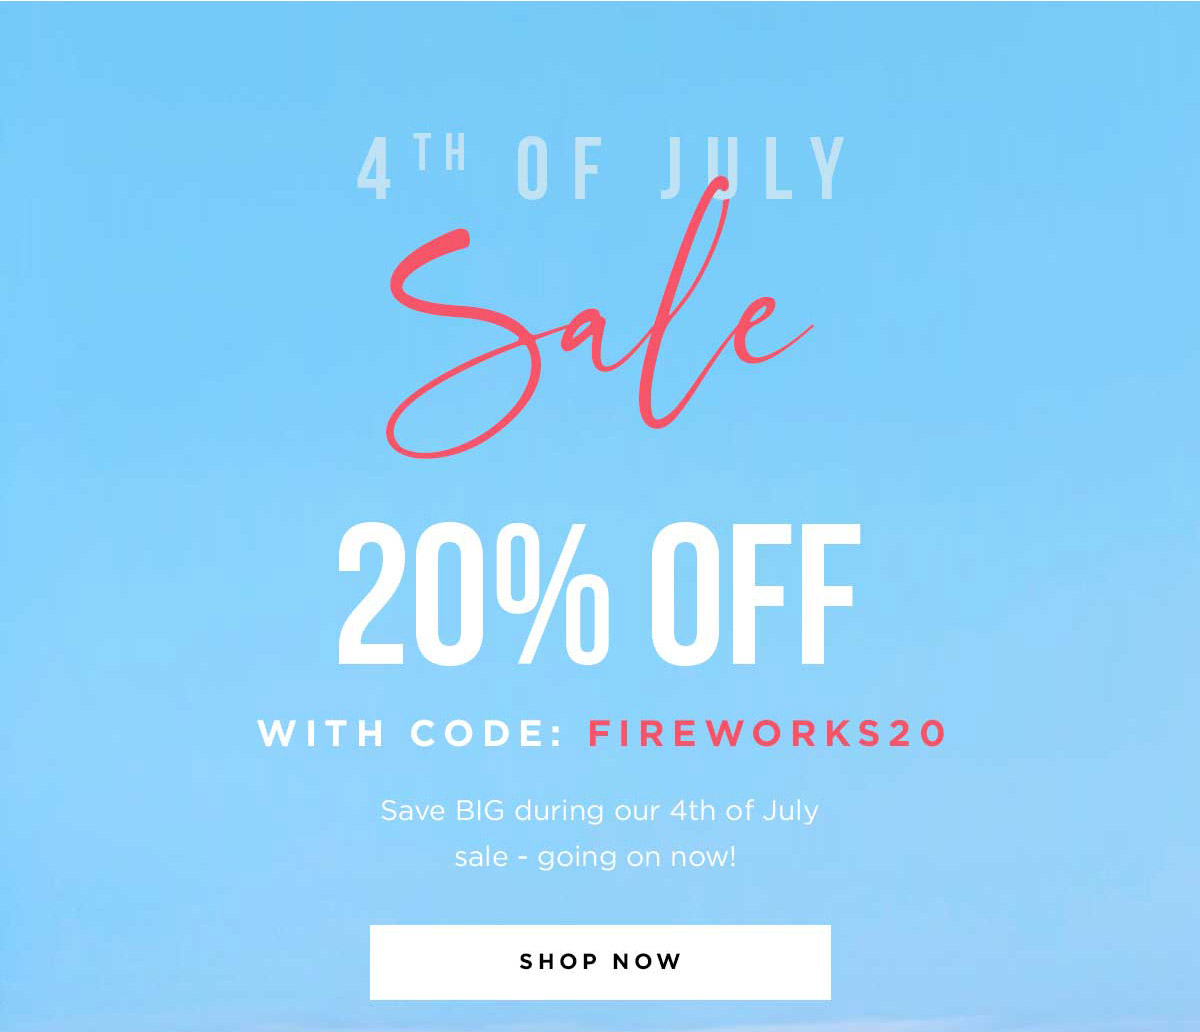 4TH OF JULY SALE - 20% OFF WITH CODE FIREWORKS20 - SHOP NOW